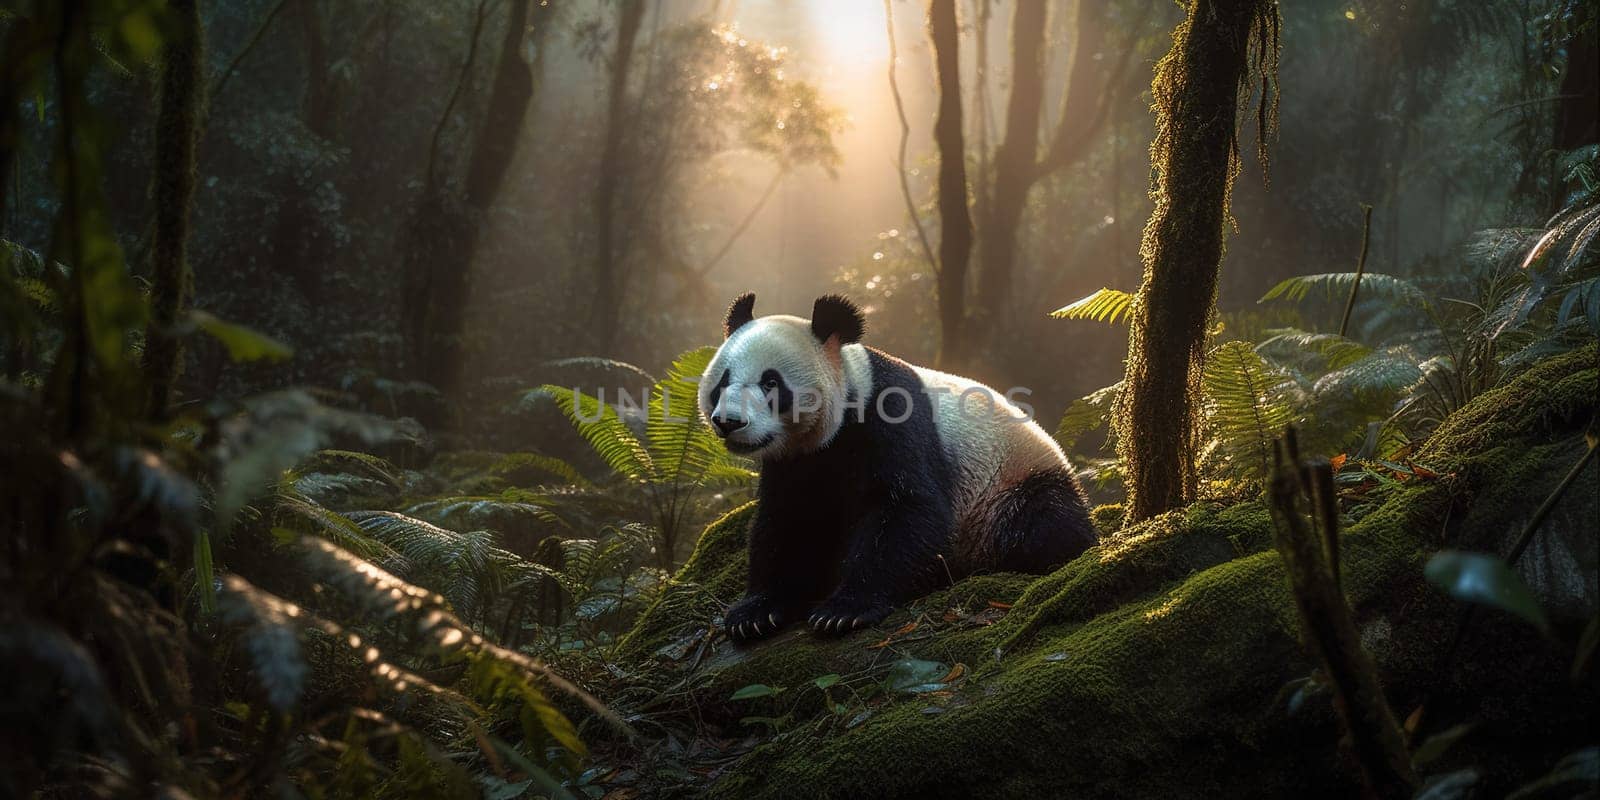 Cute Panda Bear In The Jungle Forest In The Evening by GekaSkr